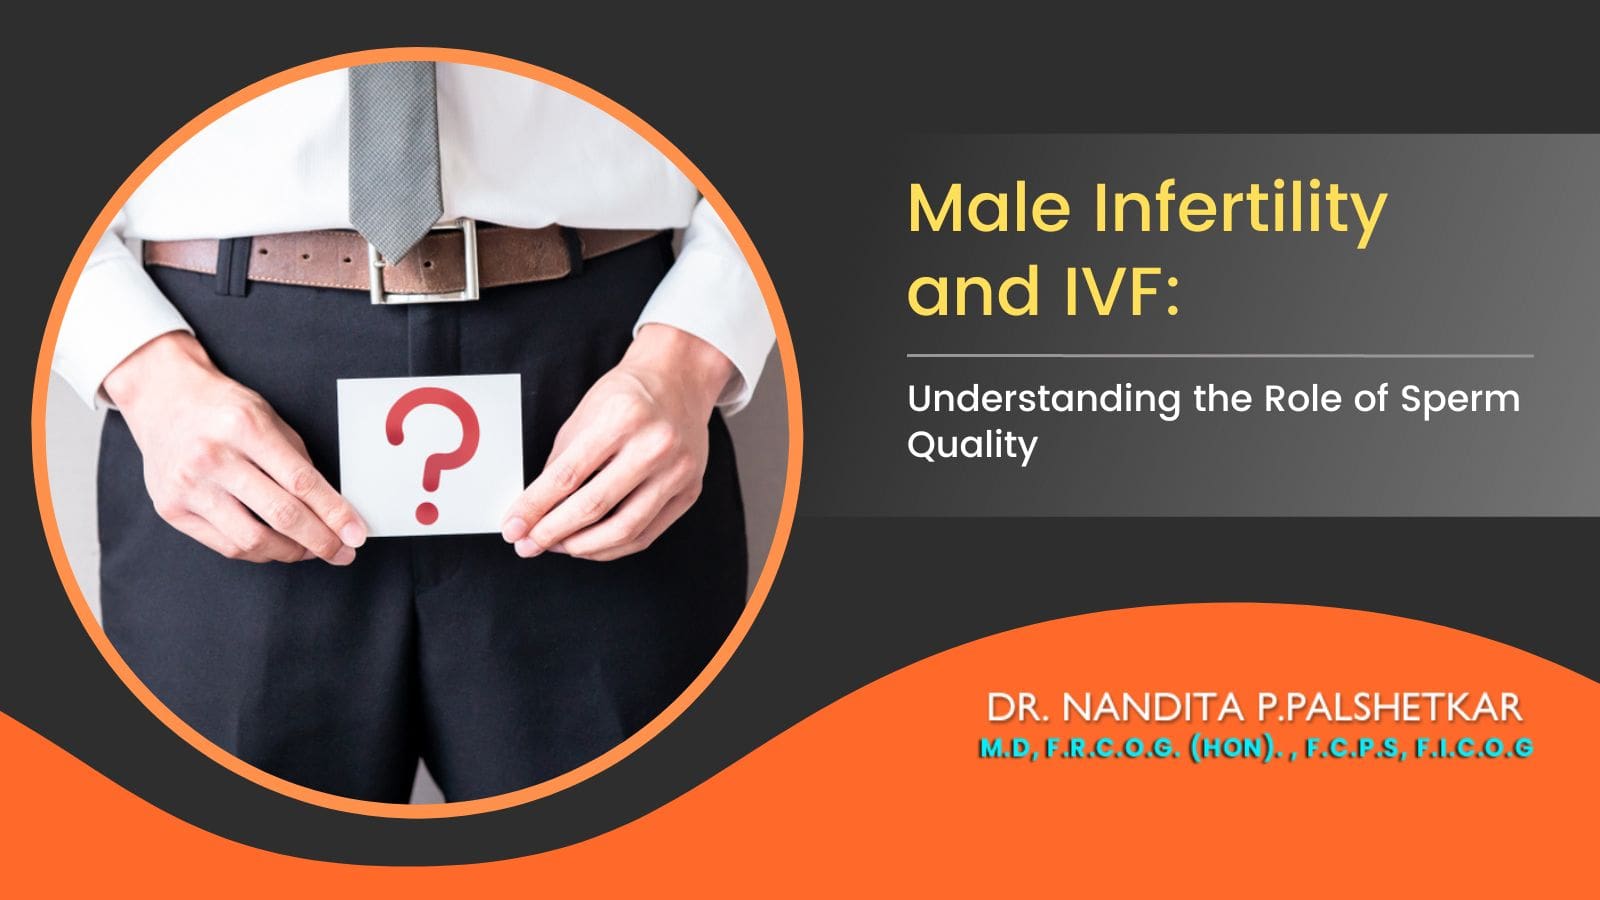 Male Infertility and IVF: Understanding the Role of Sperm Quality